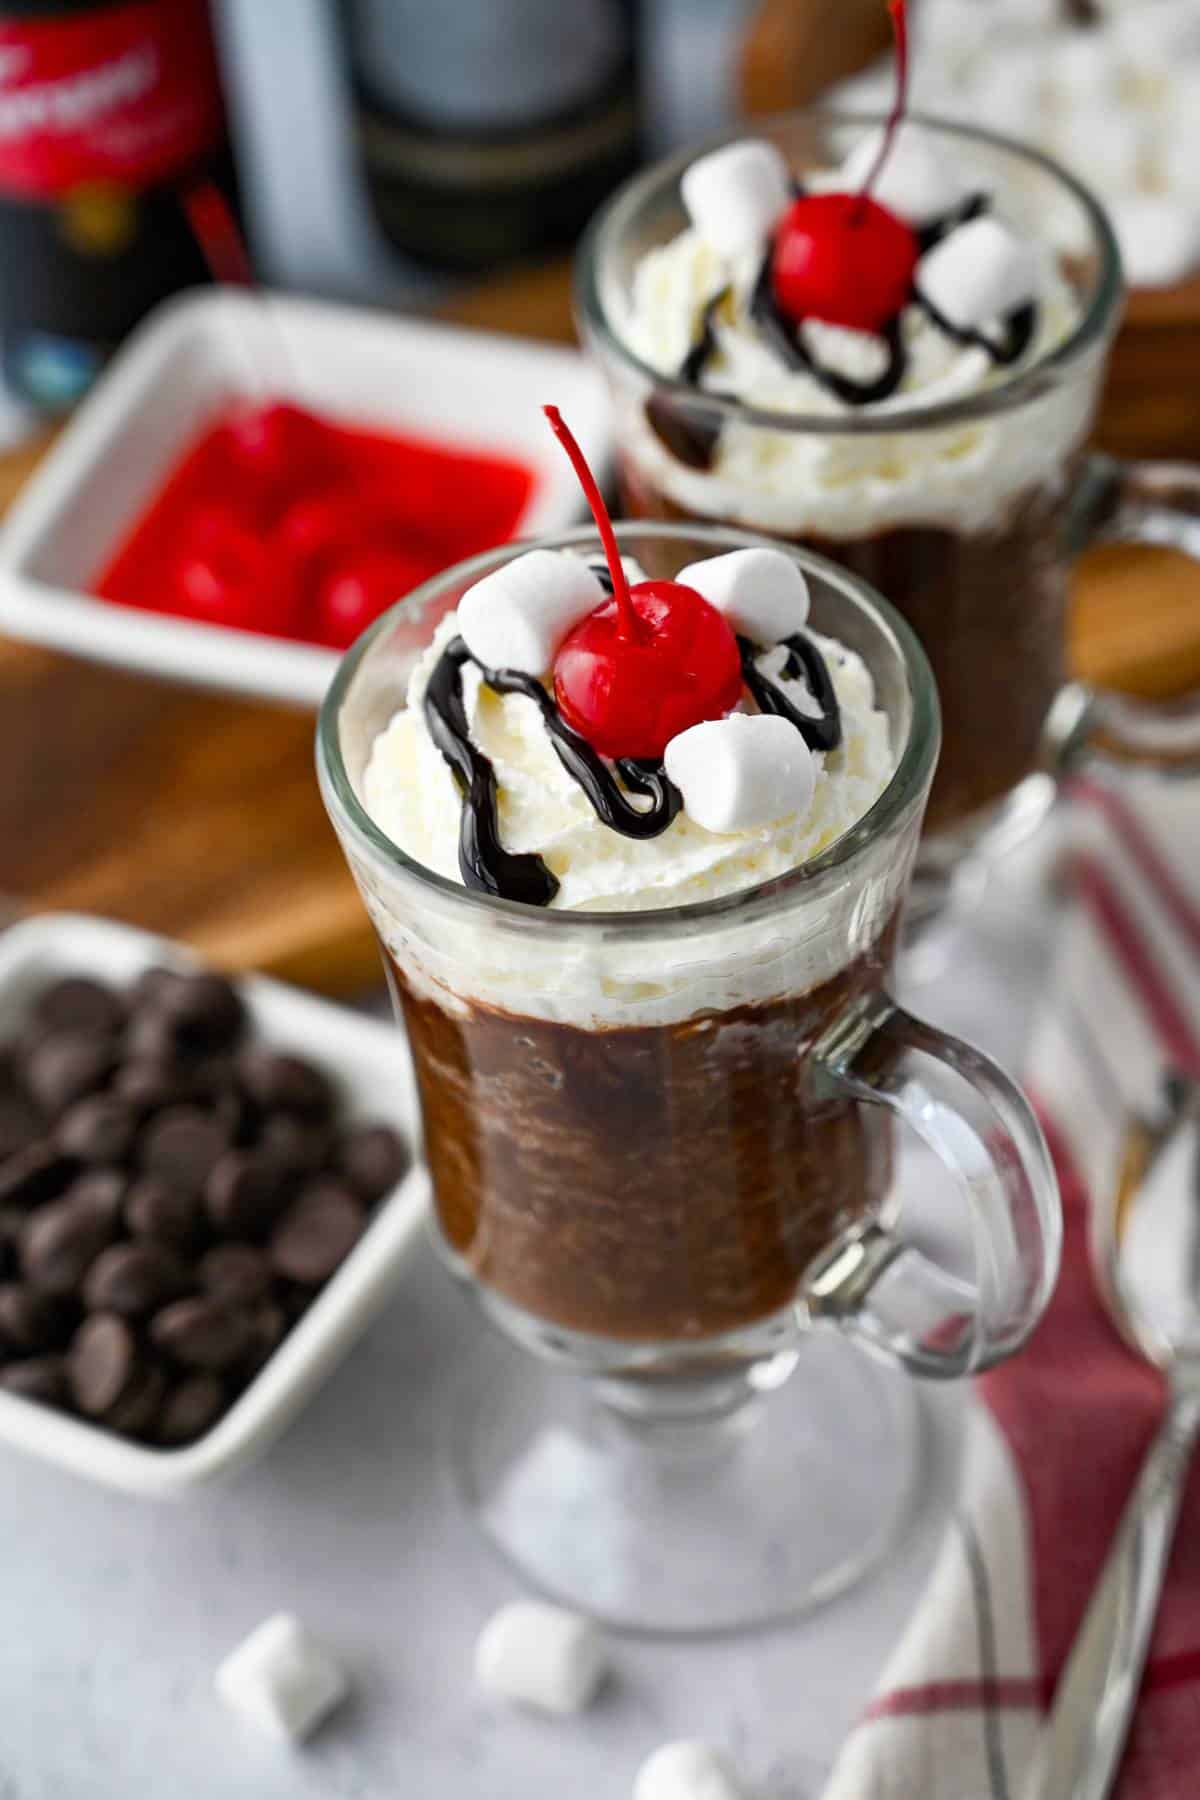 two mug cakes made with hot cocoa mix topped with whipped cream, chocolate sauce, and cherries with a bowl of chocolate chips and cherries next to them